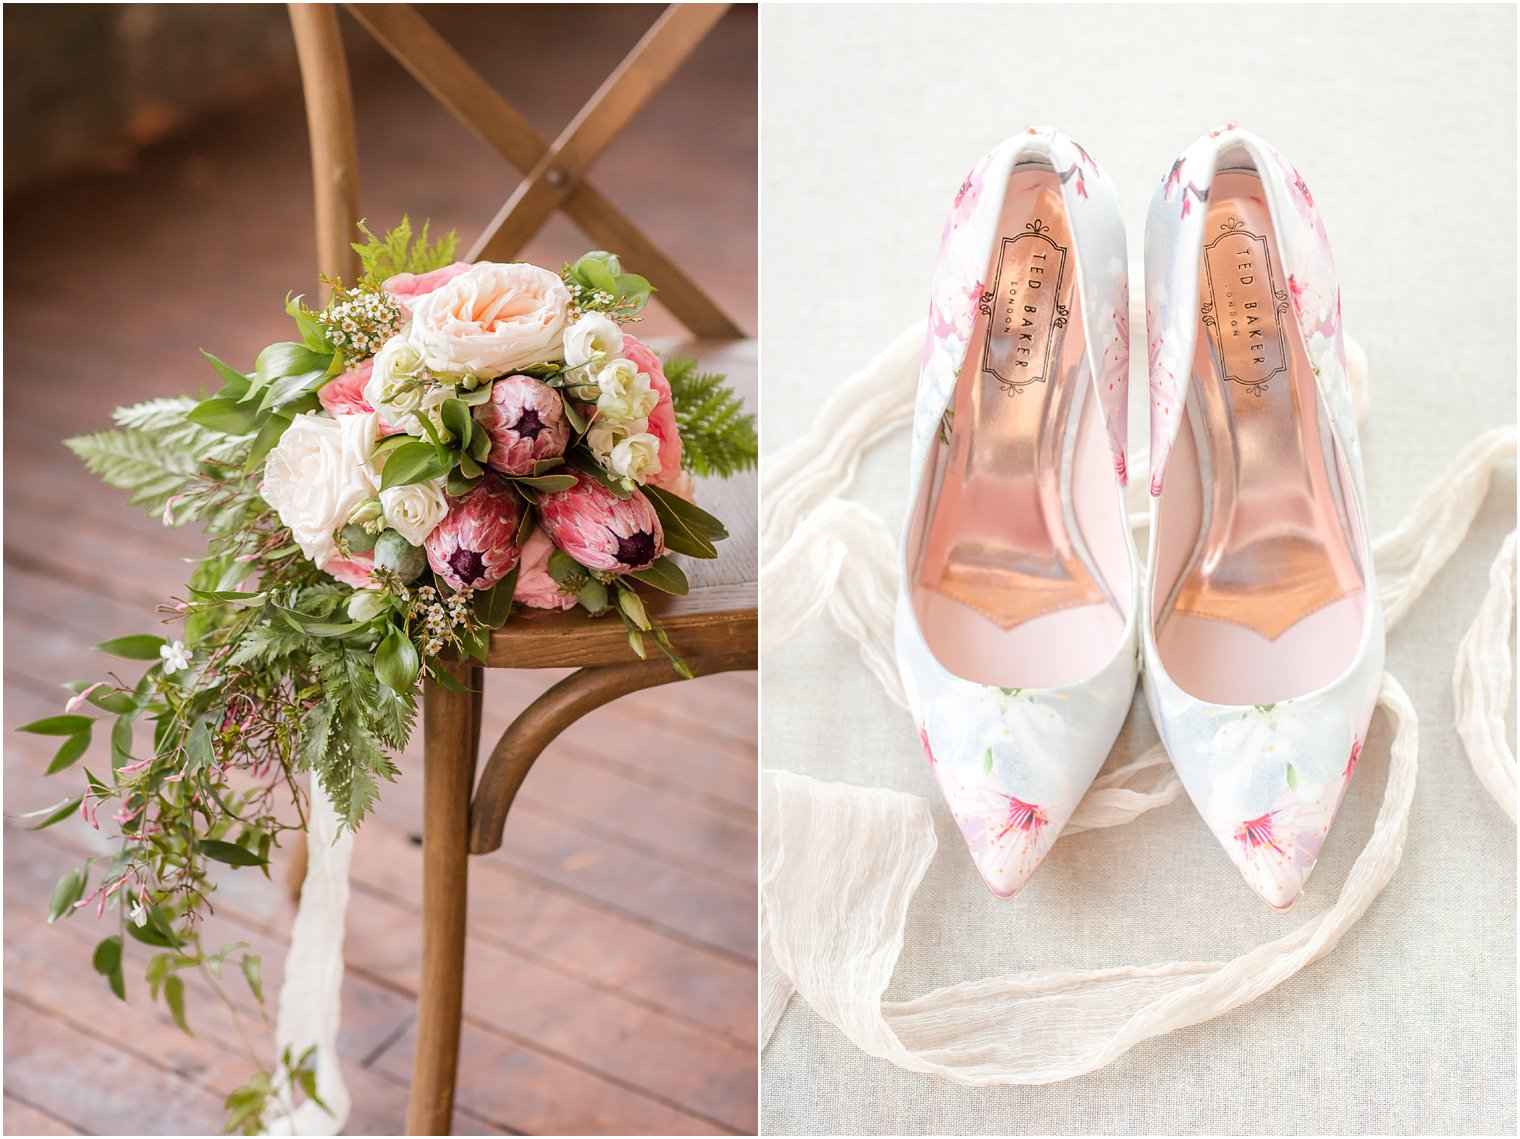 Floral wedding shoes by Ted Baker